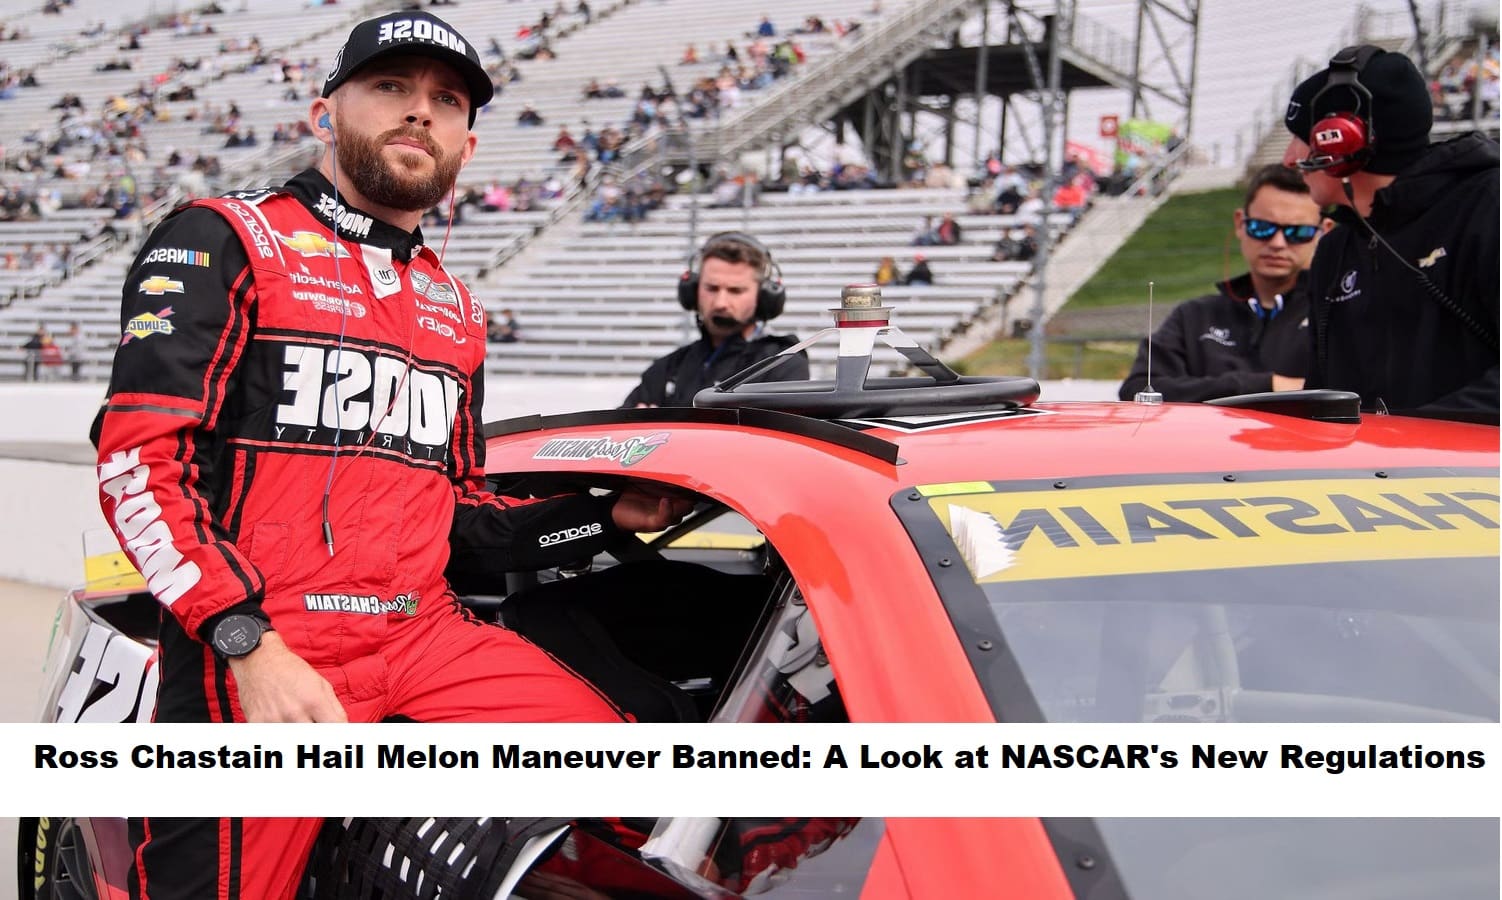 ross-chastain-hail-melon-maneuver-banned-a-look-at-nascars-new-regulations